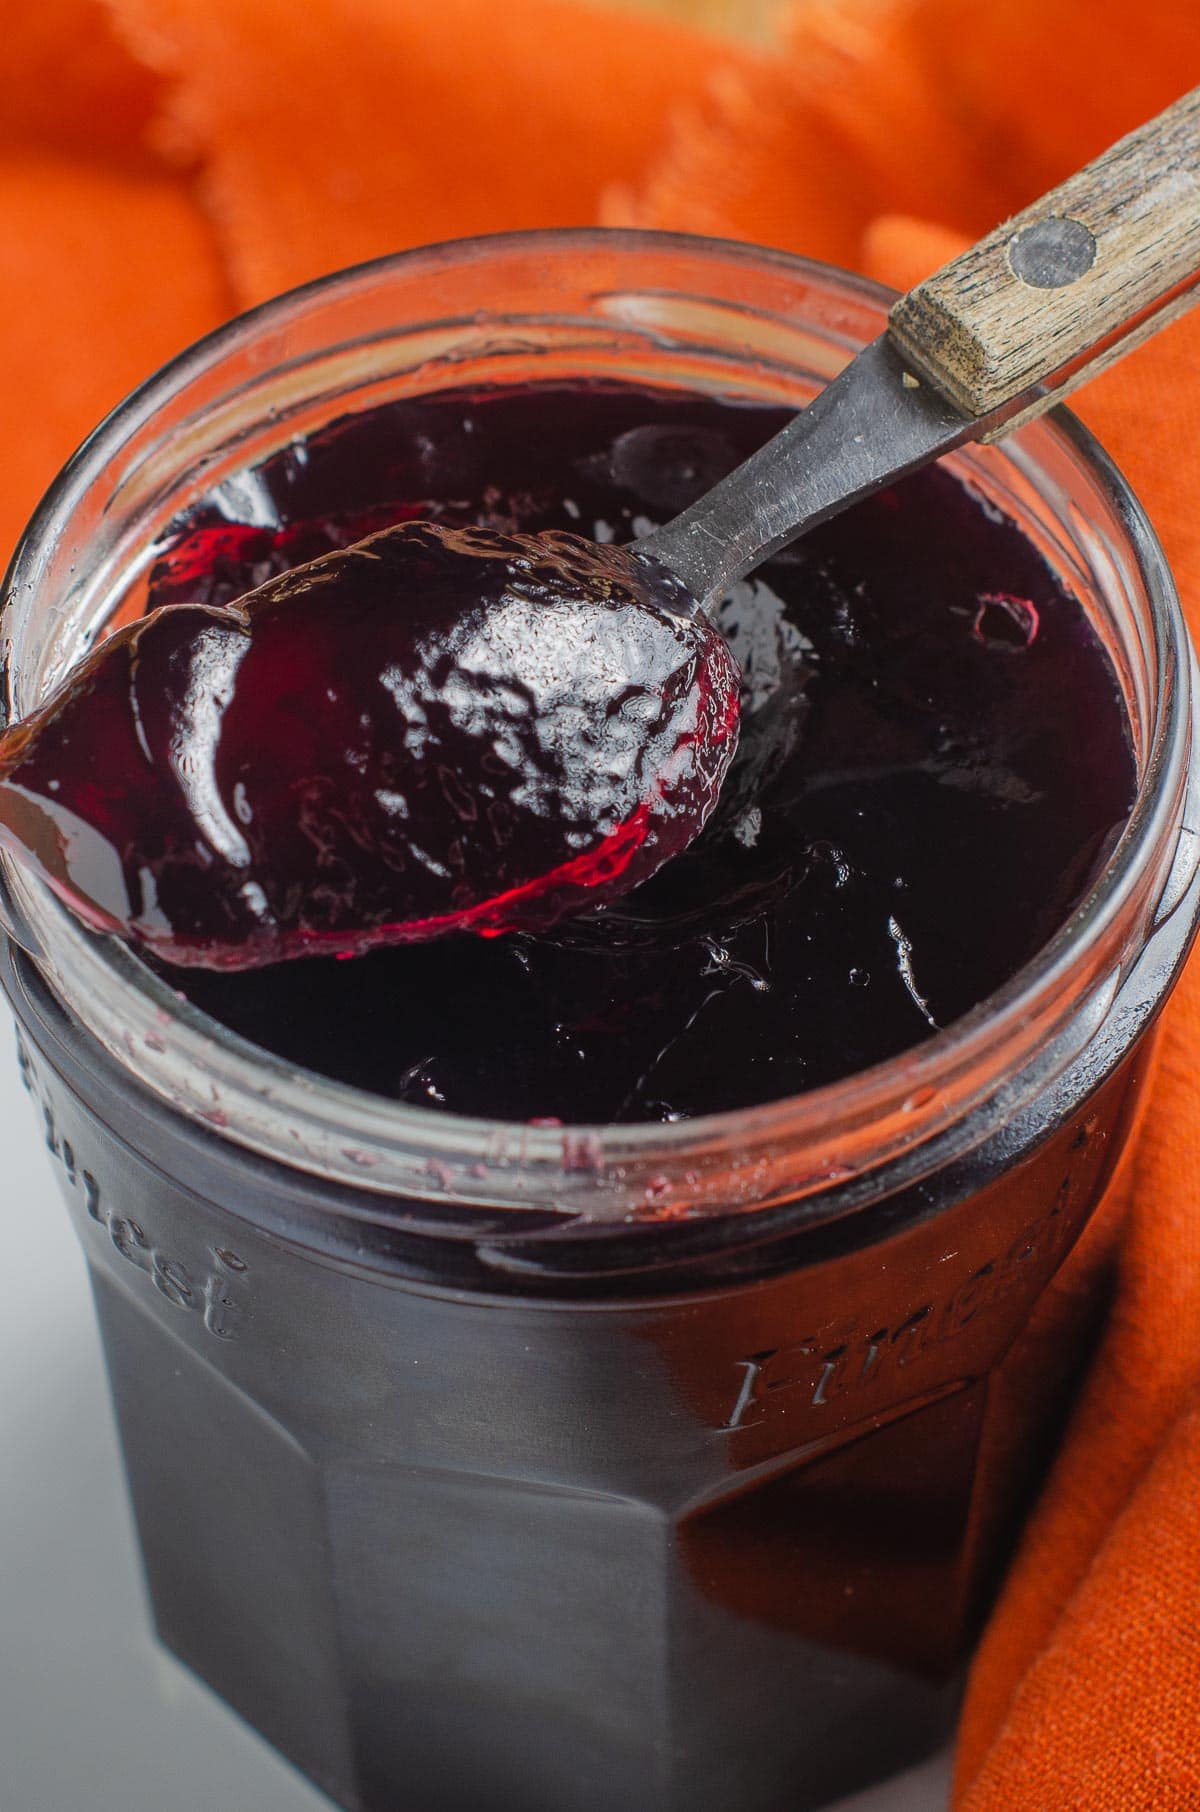 A jar of blackcurrant smooth jelly with a wooden handle spoon.